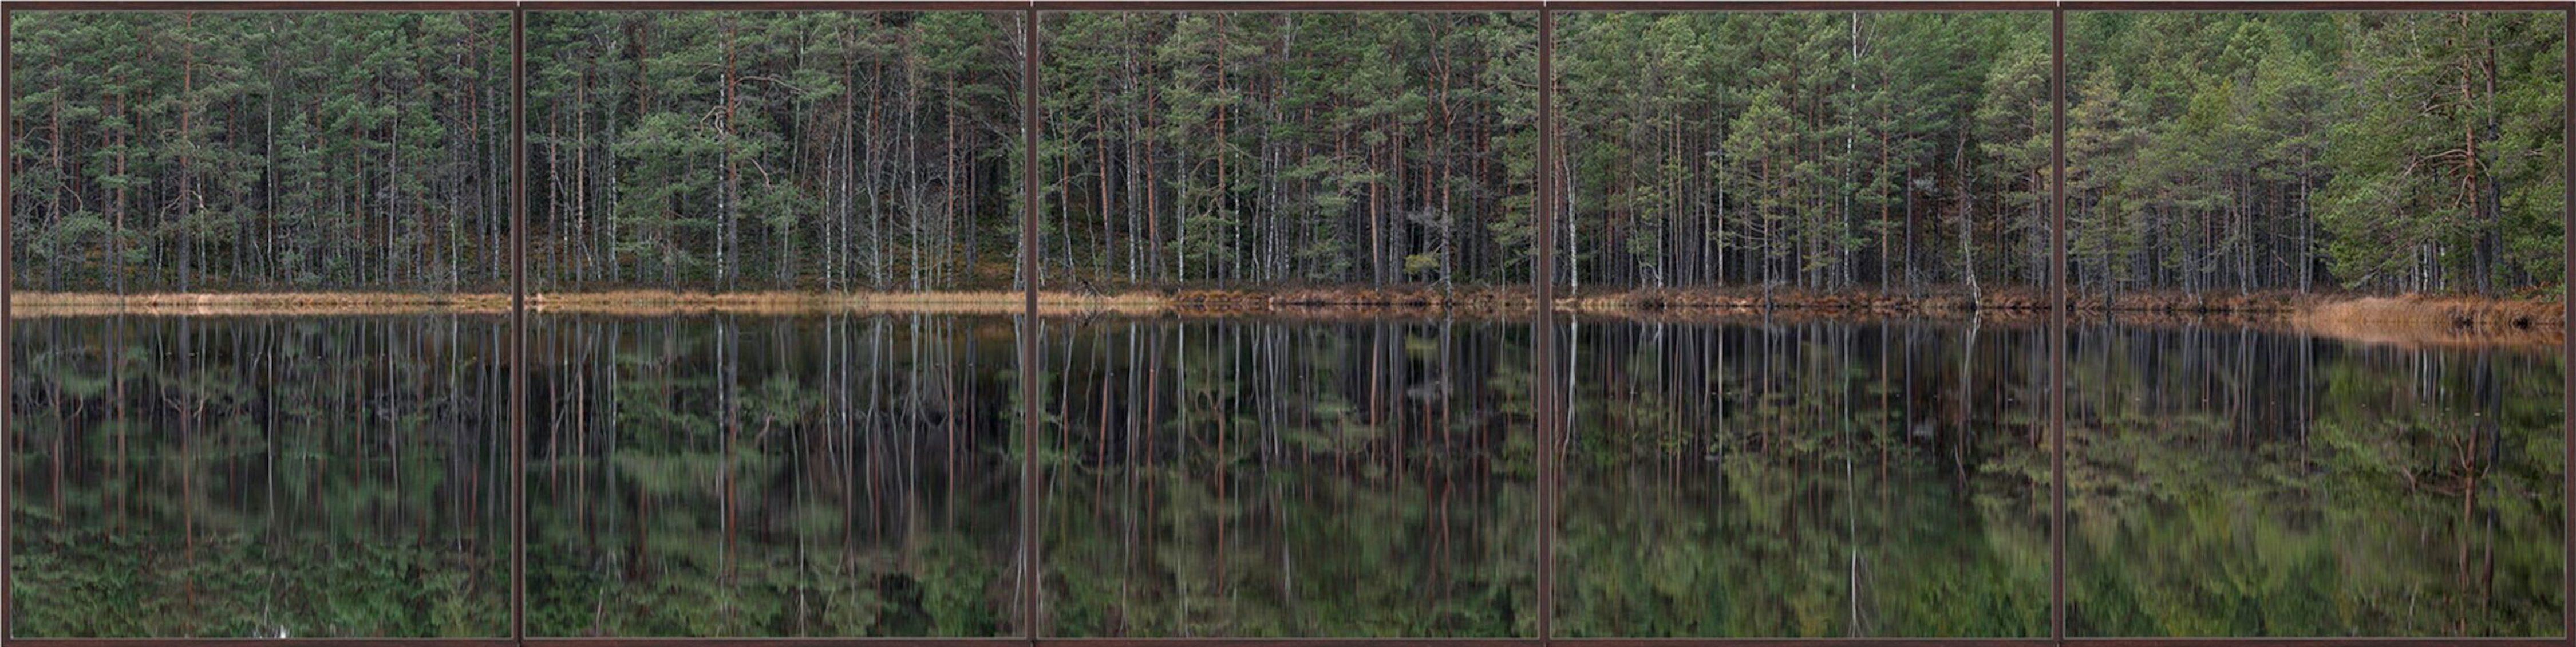 Deep Mirroring Forest 012 is a limited-edition photograph by German contemporary artist Bernhard Lang. 

This photograph is sold unframed as a print only. It is available in 5 dimensions:
*30 × 120 cm (11.8 × 47.2 in), edition of 5 copies
*40 × 160